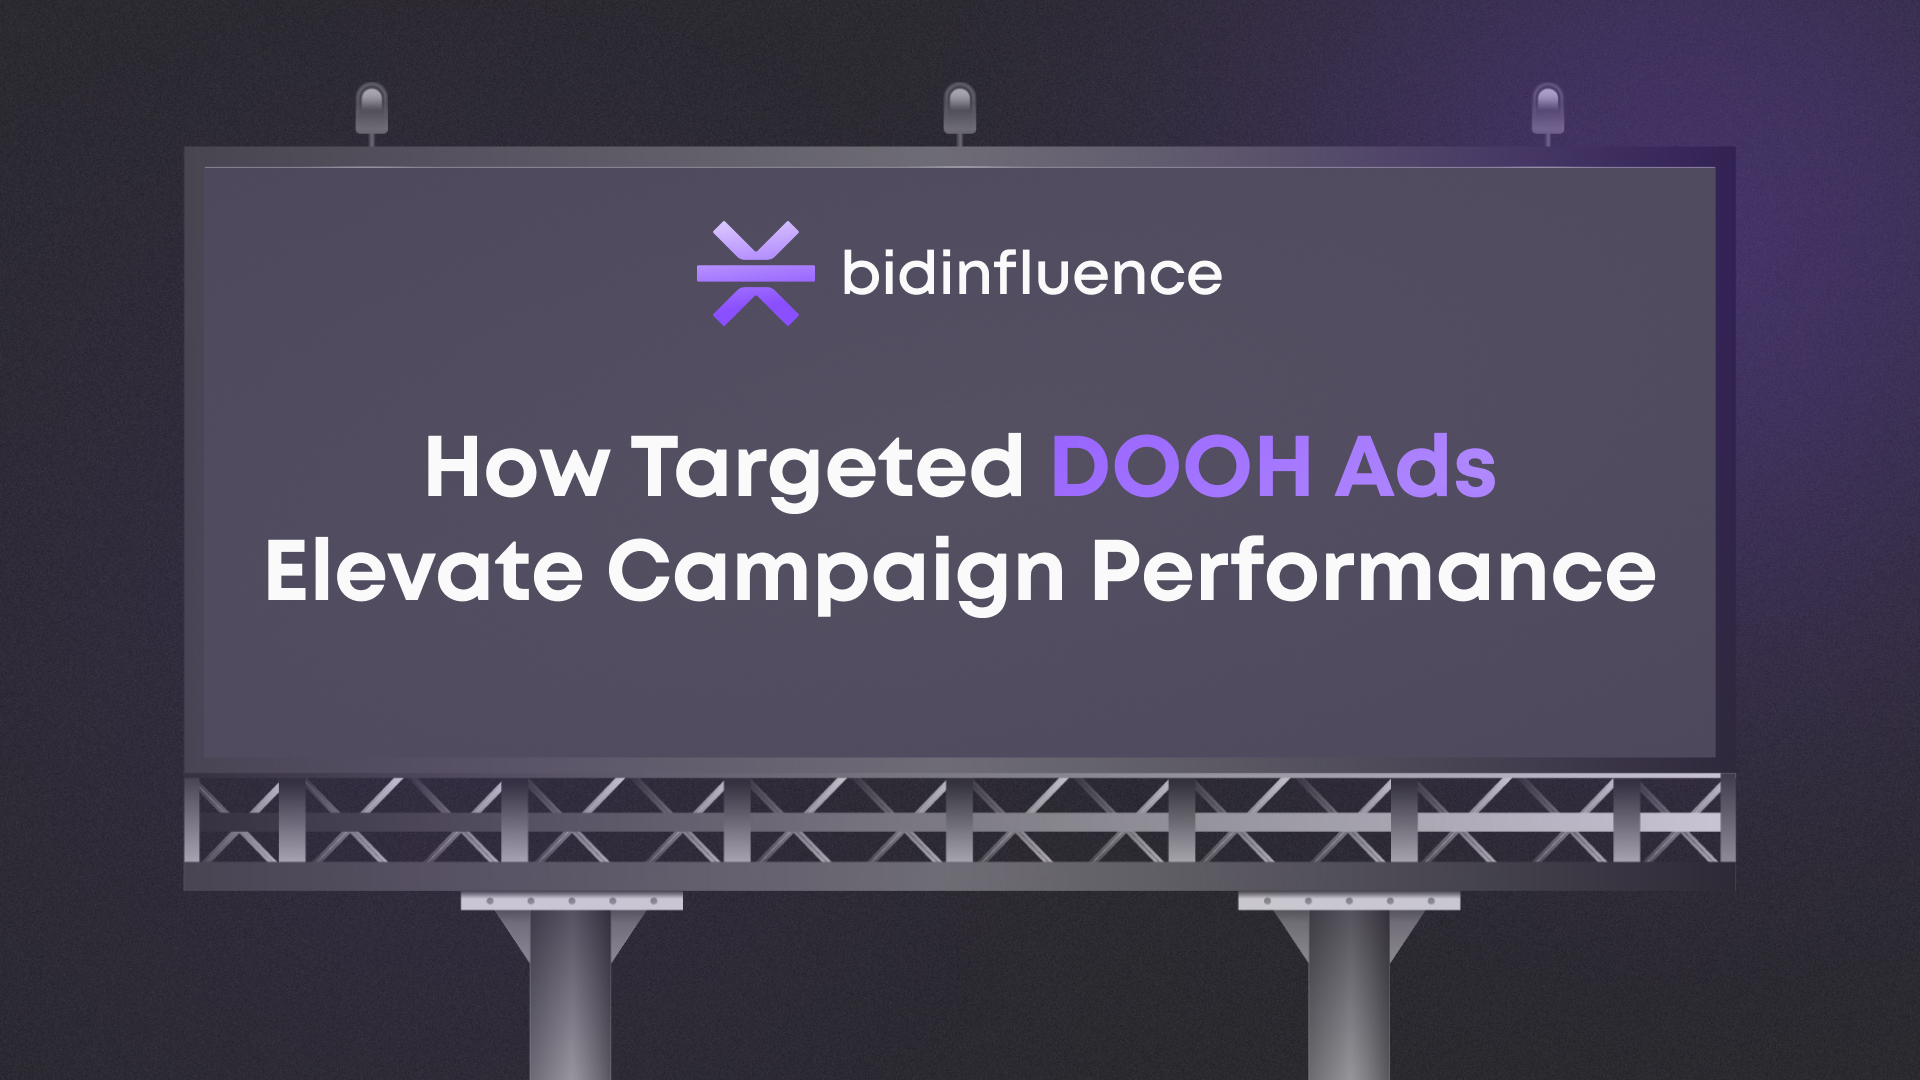 How Targeted DOOH ads Elevate Campaign Perfomance